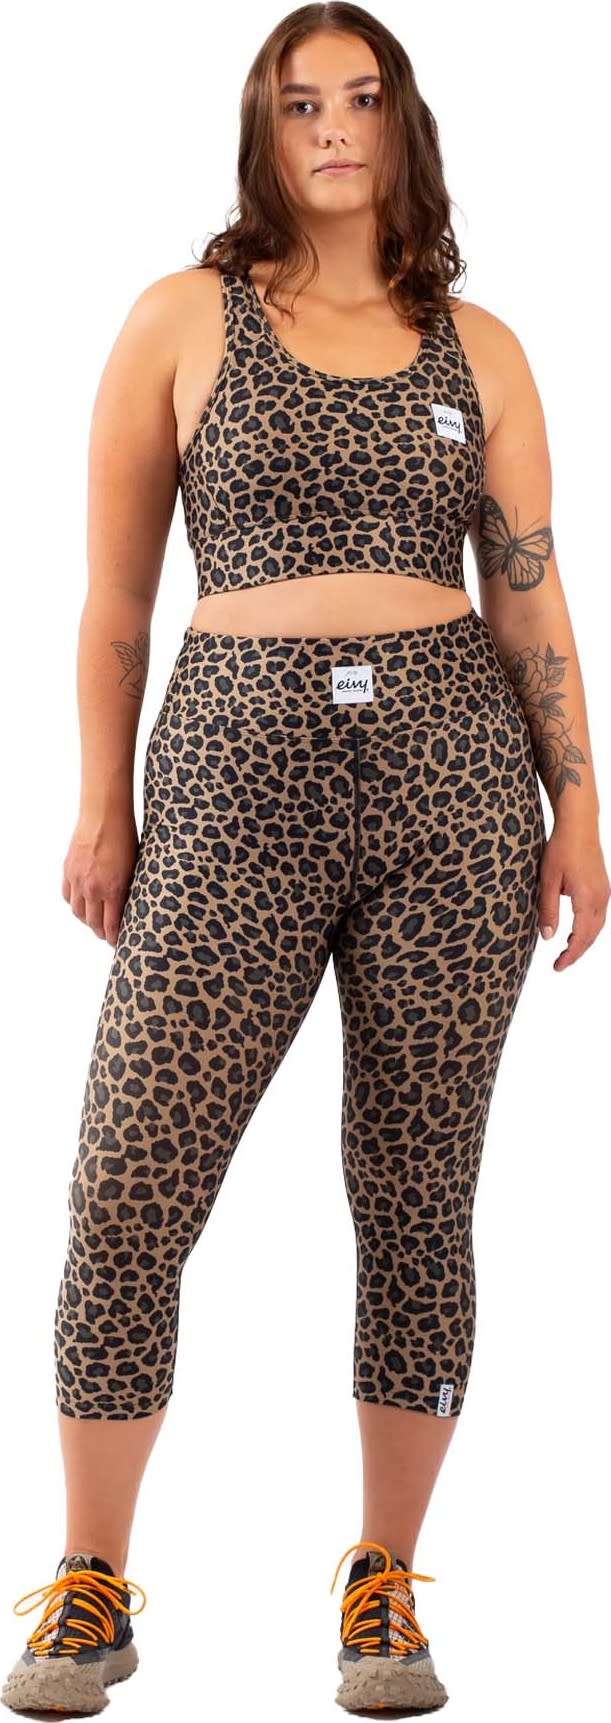 Women's Icecold 3/4 Tights Leopard Eivy